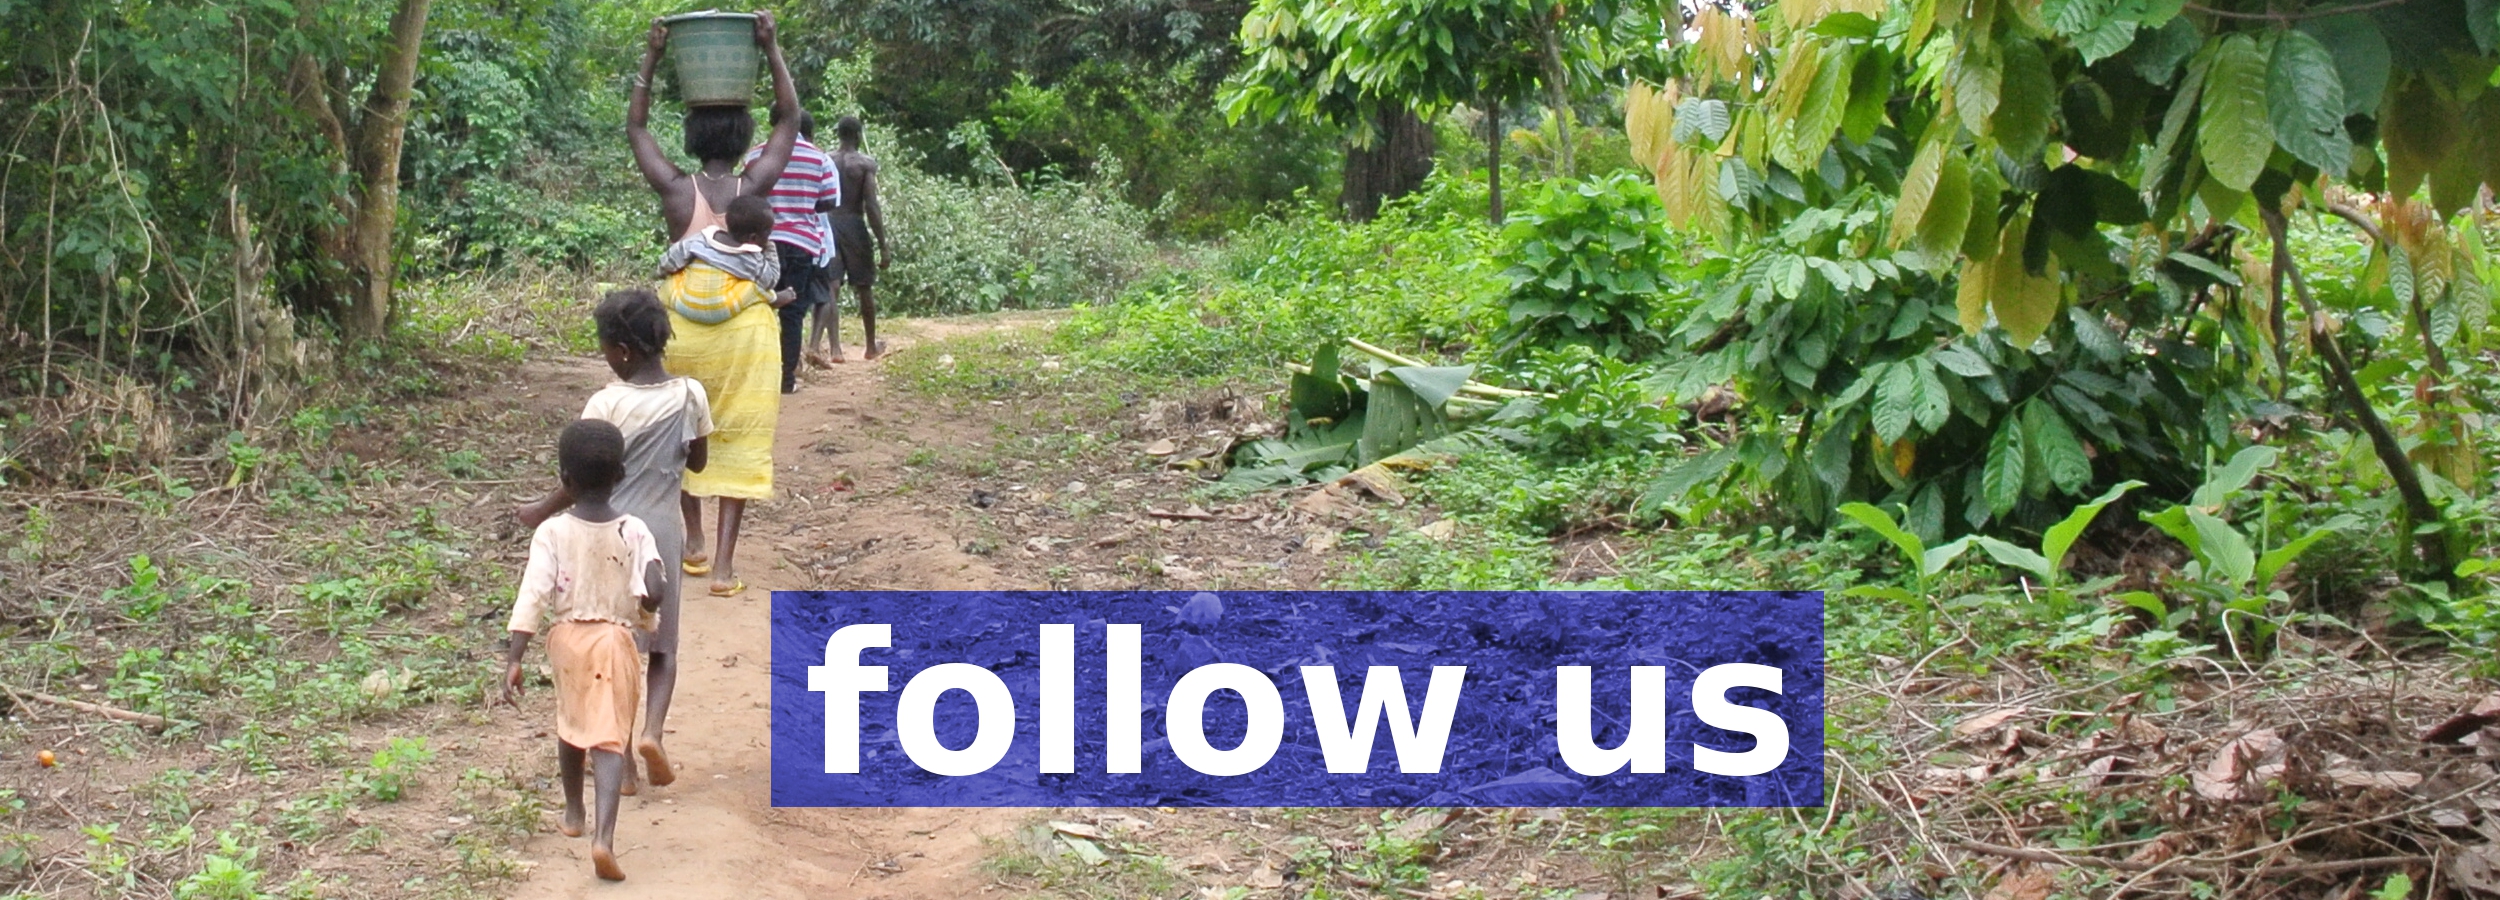 Follow us! by OFIE.ORG